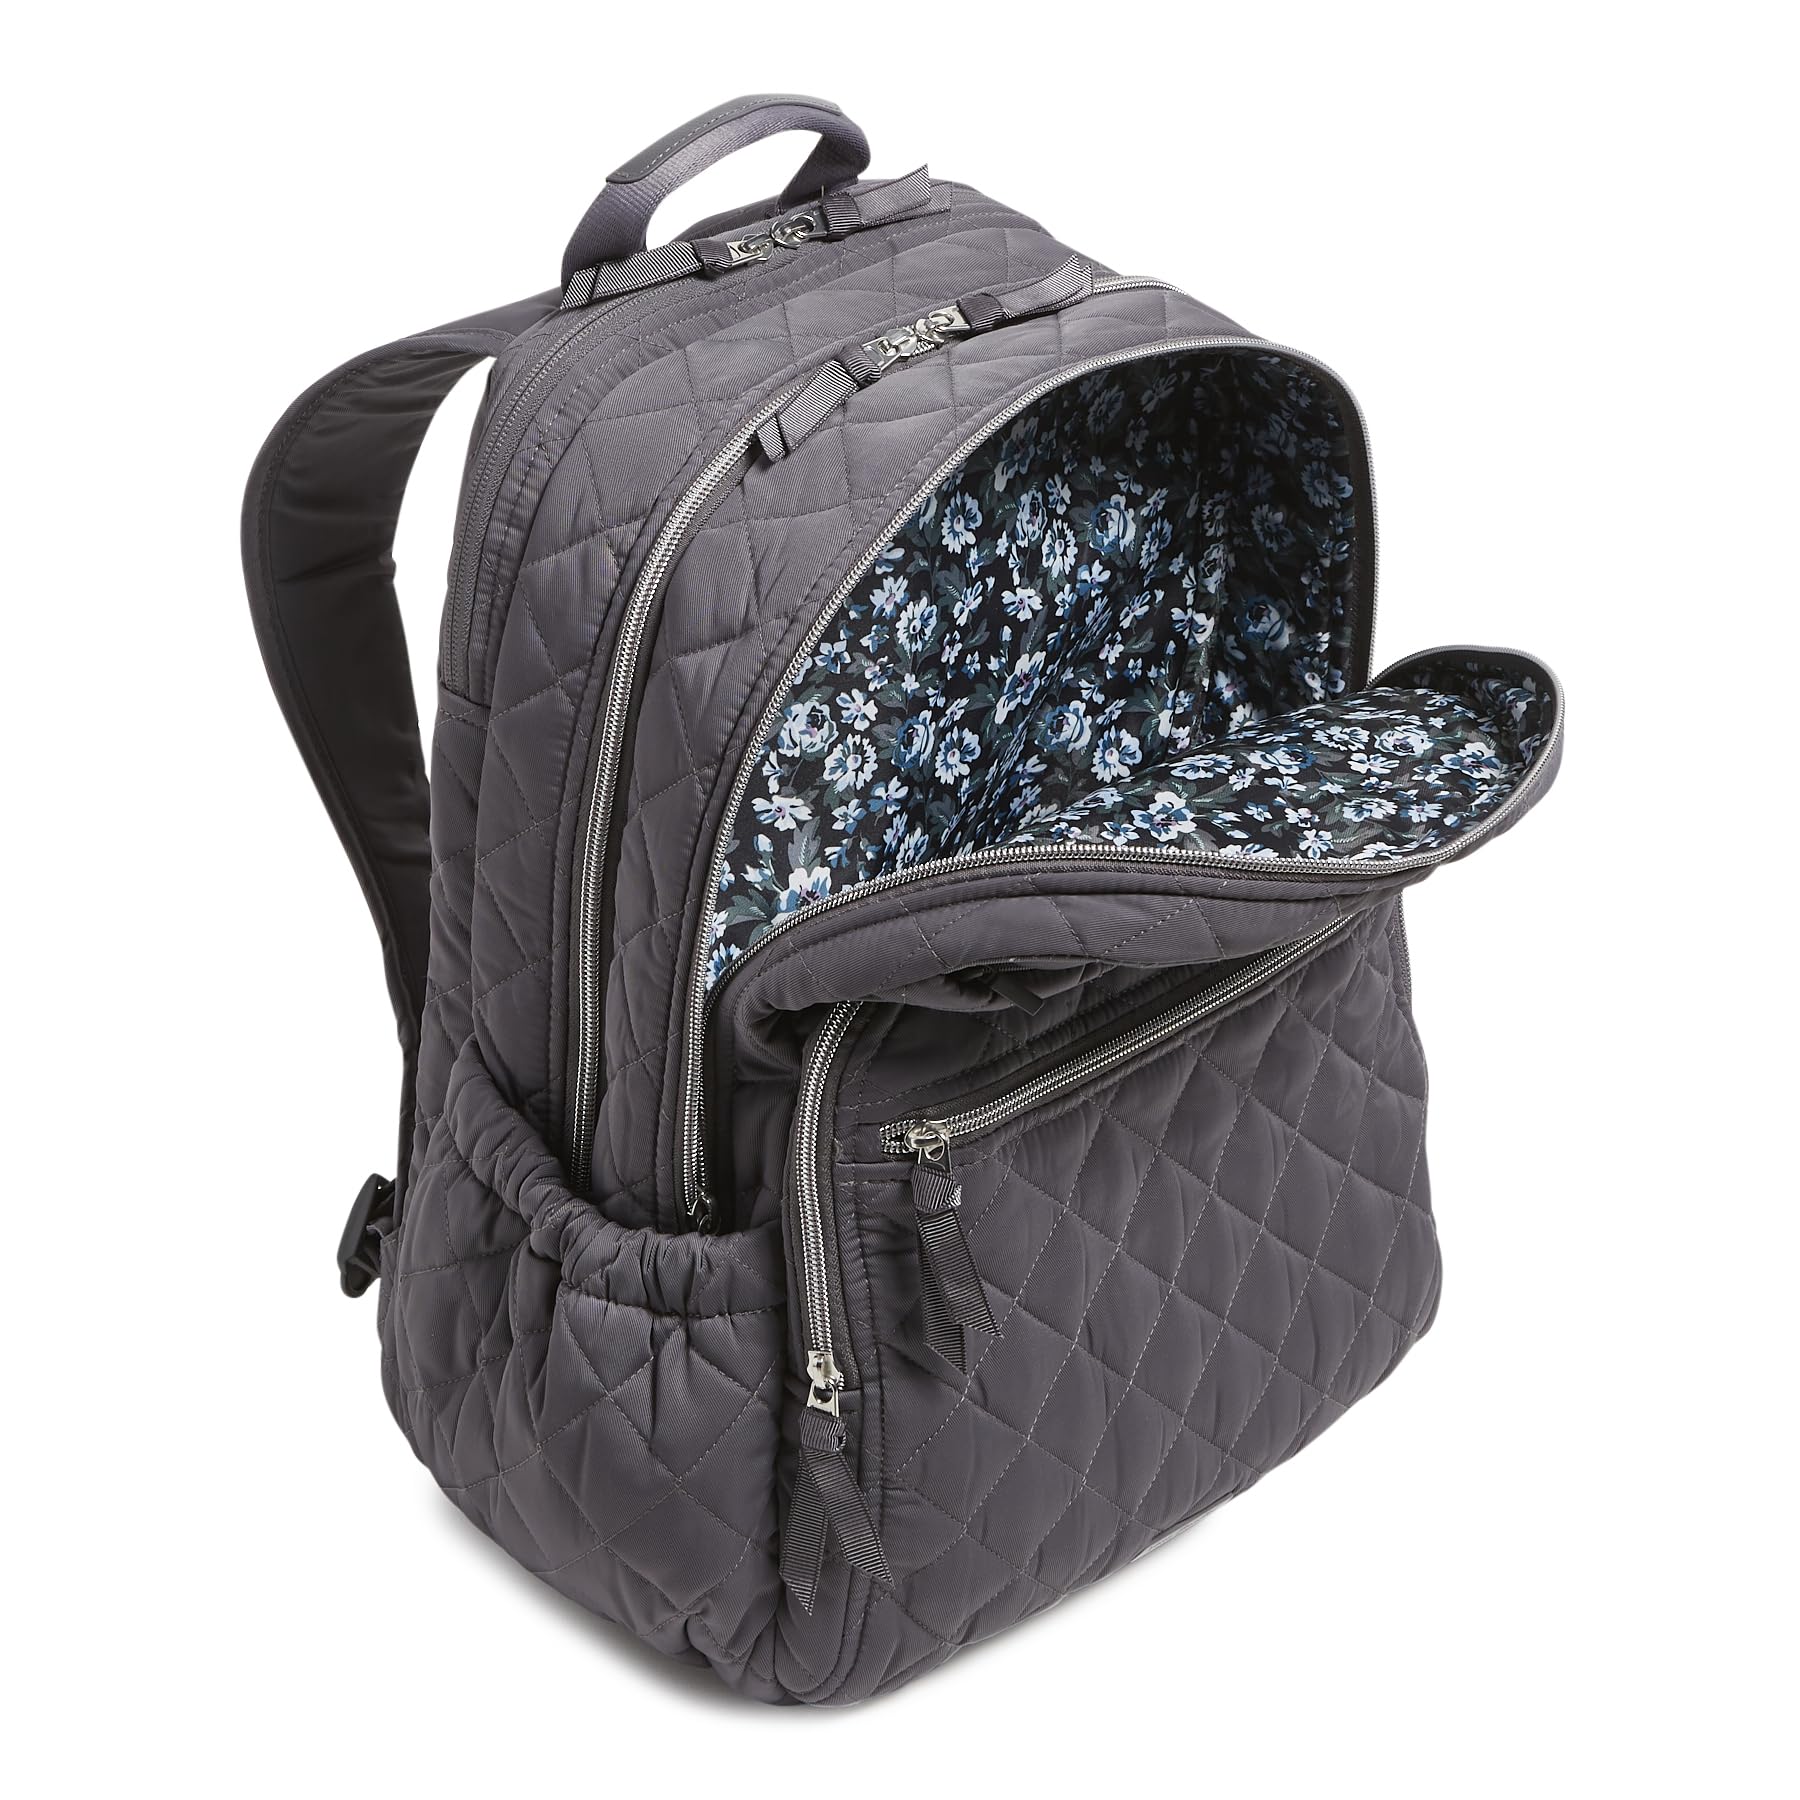 Vera Bradley Women's, Performance Twill Xl Campus Backpack, Shadow Gray, One Size